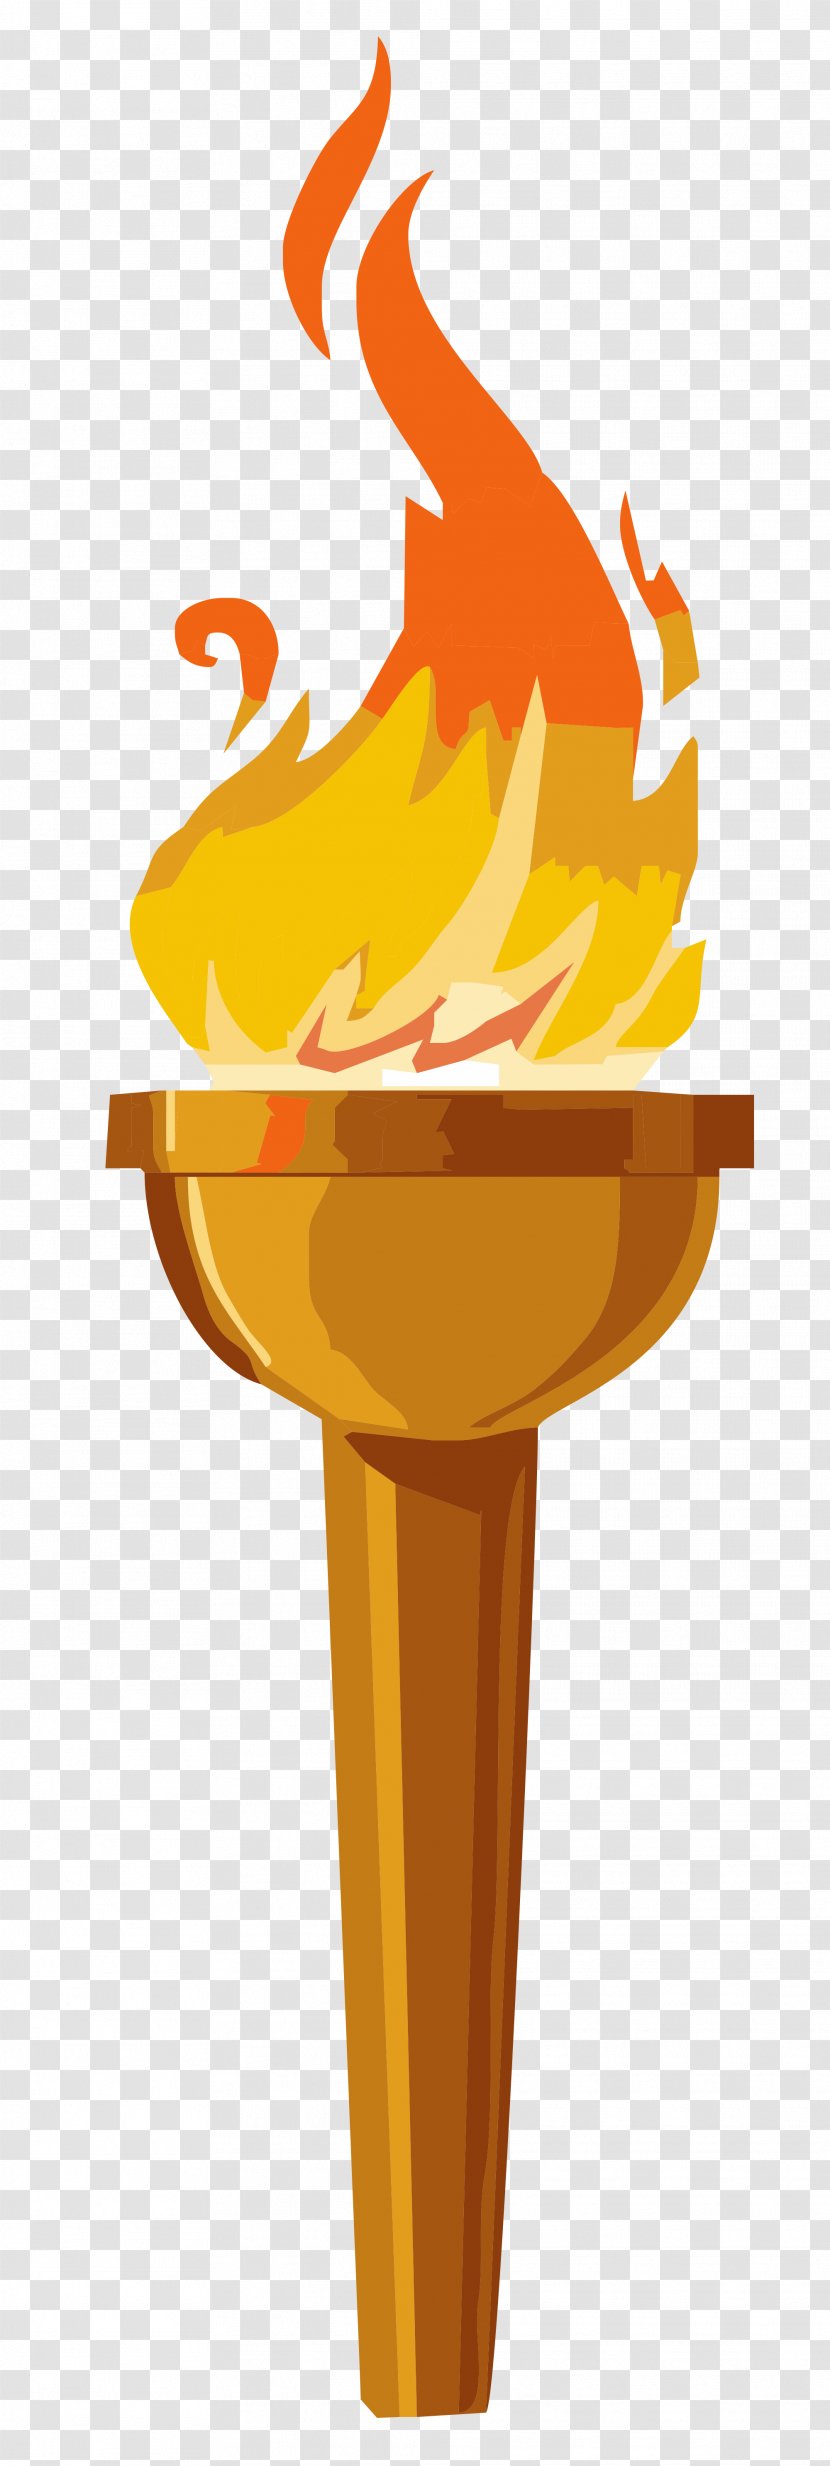 Olympic Games Torch Clip Art - Ice Cream Cone Transparent PNG